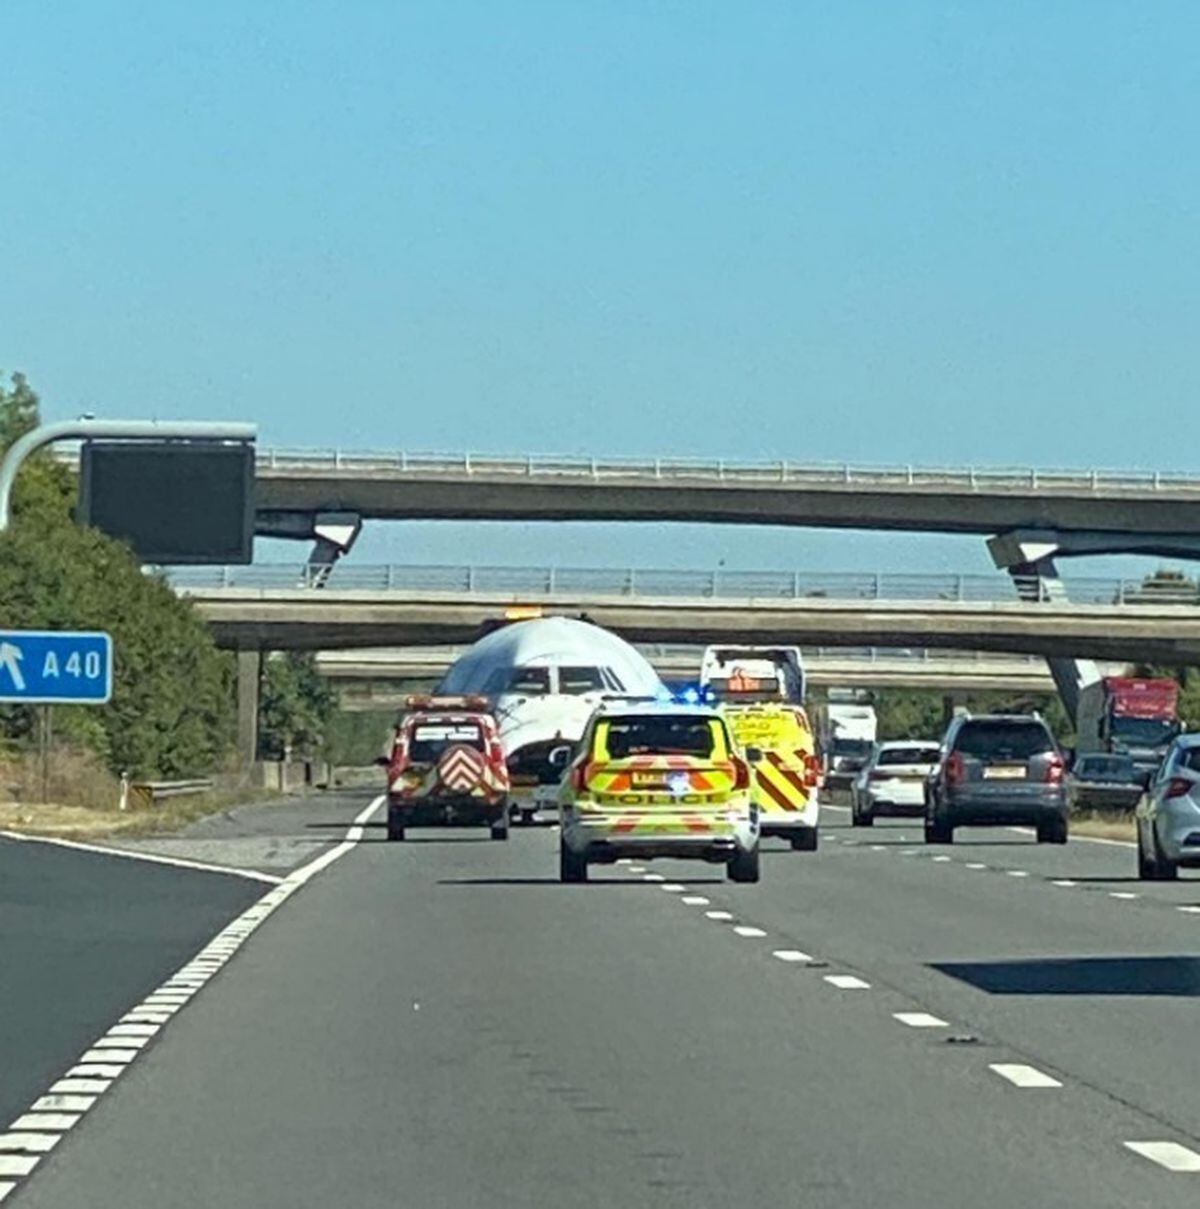 The plane being carried up the M5. Photo: @thedeck747